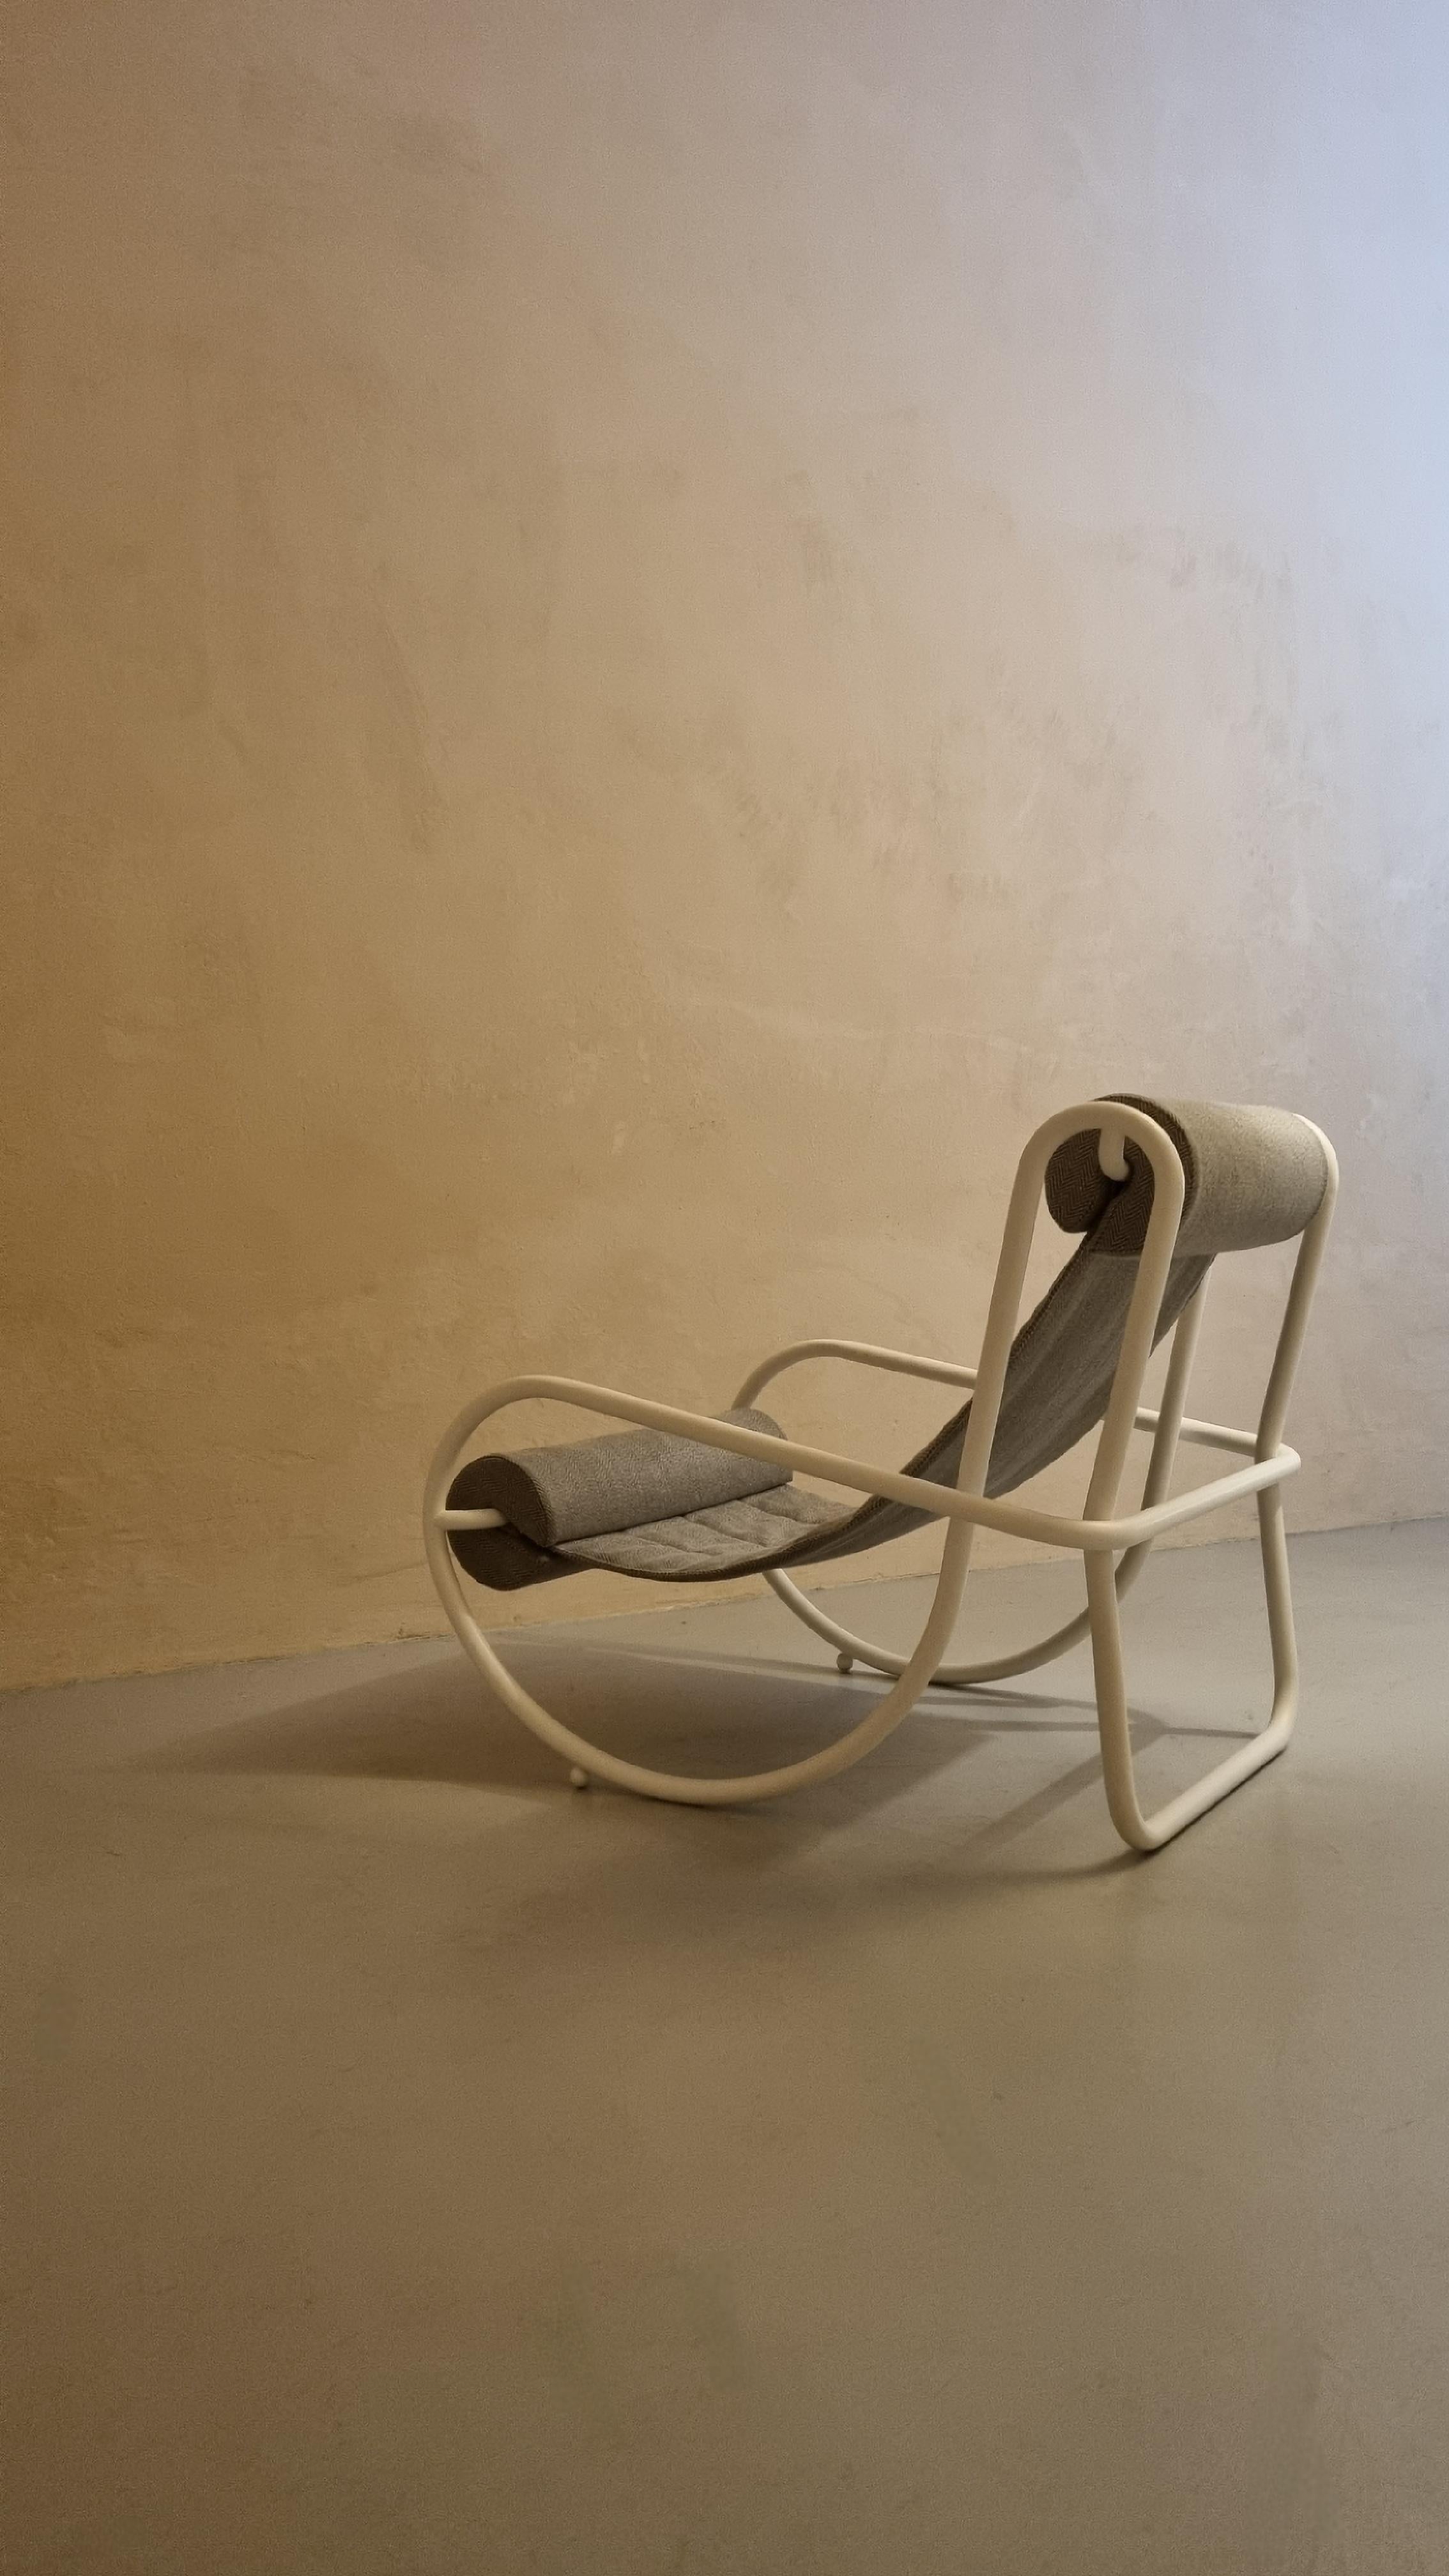 Locus Solus armchair by Gae Aulenti for Poltronova, 1964 In Excellent Condition For Sale In Arezzo, Italy